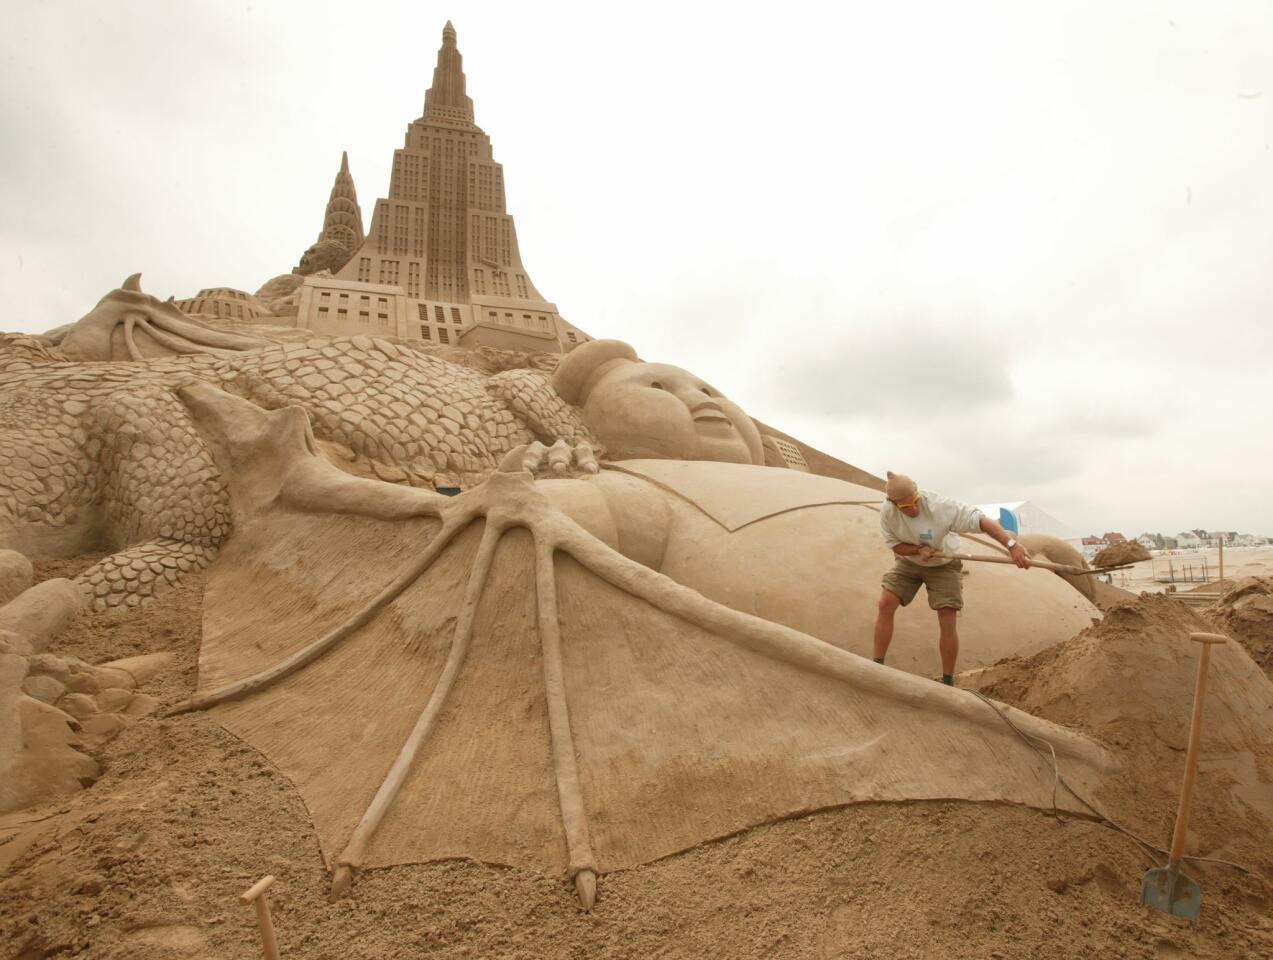 Photos of amazing, incredible sand sculptures! – Cool San Diego Sights!